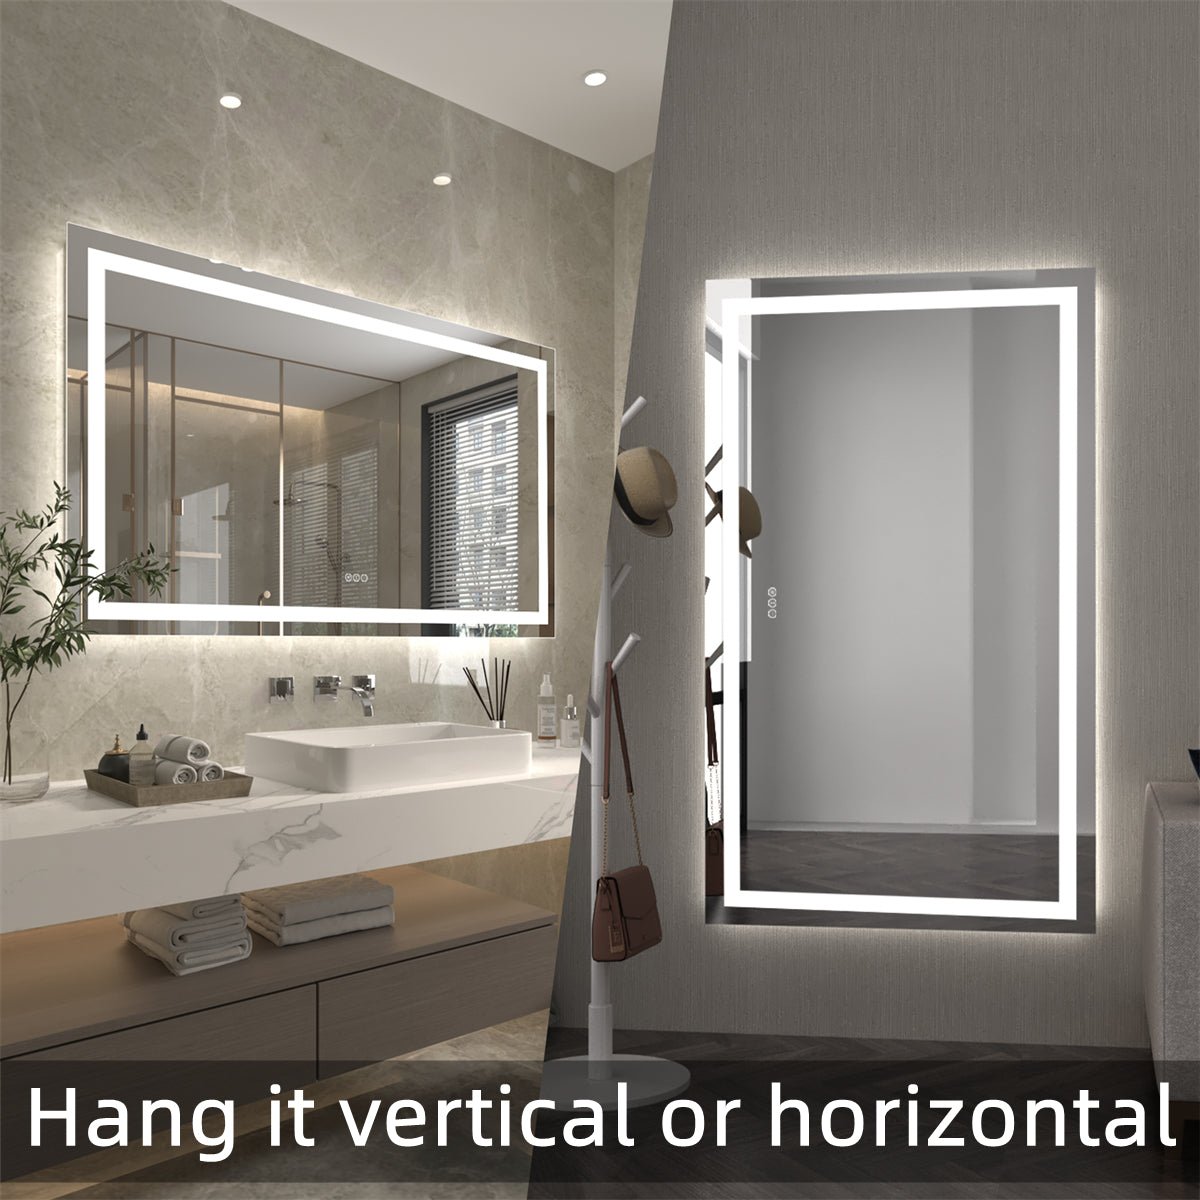 Apex 77" W x 36" H LED Bathroom Large Light Led Mirror,Anti Fog,Dimmable,Dual Lighting Mode,Tempered Glass